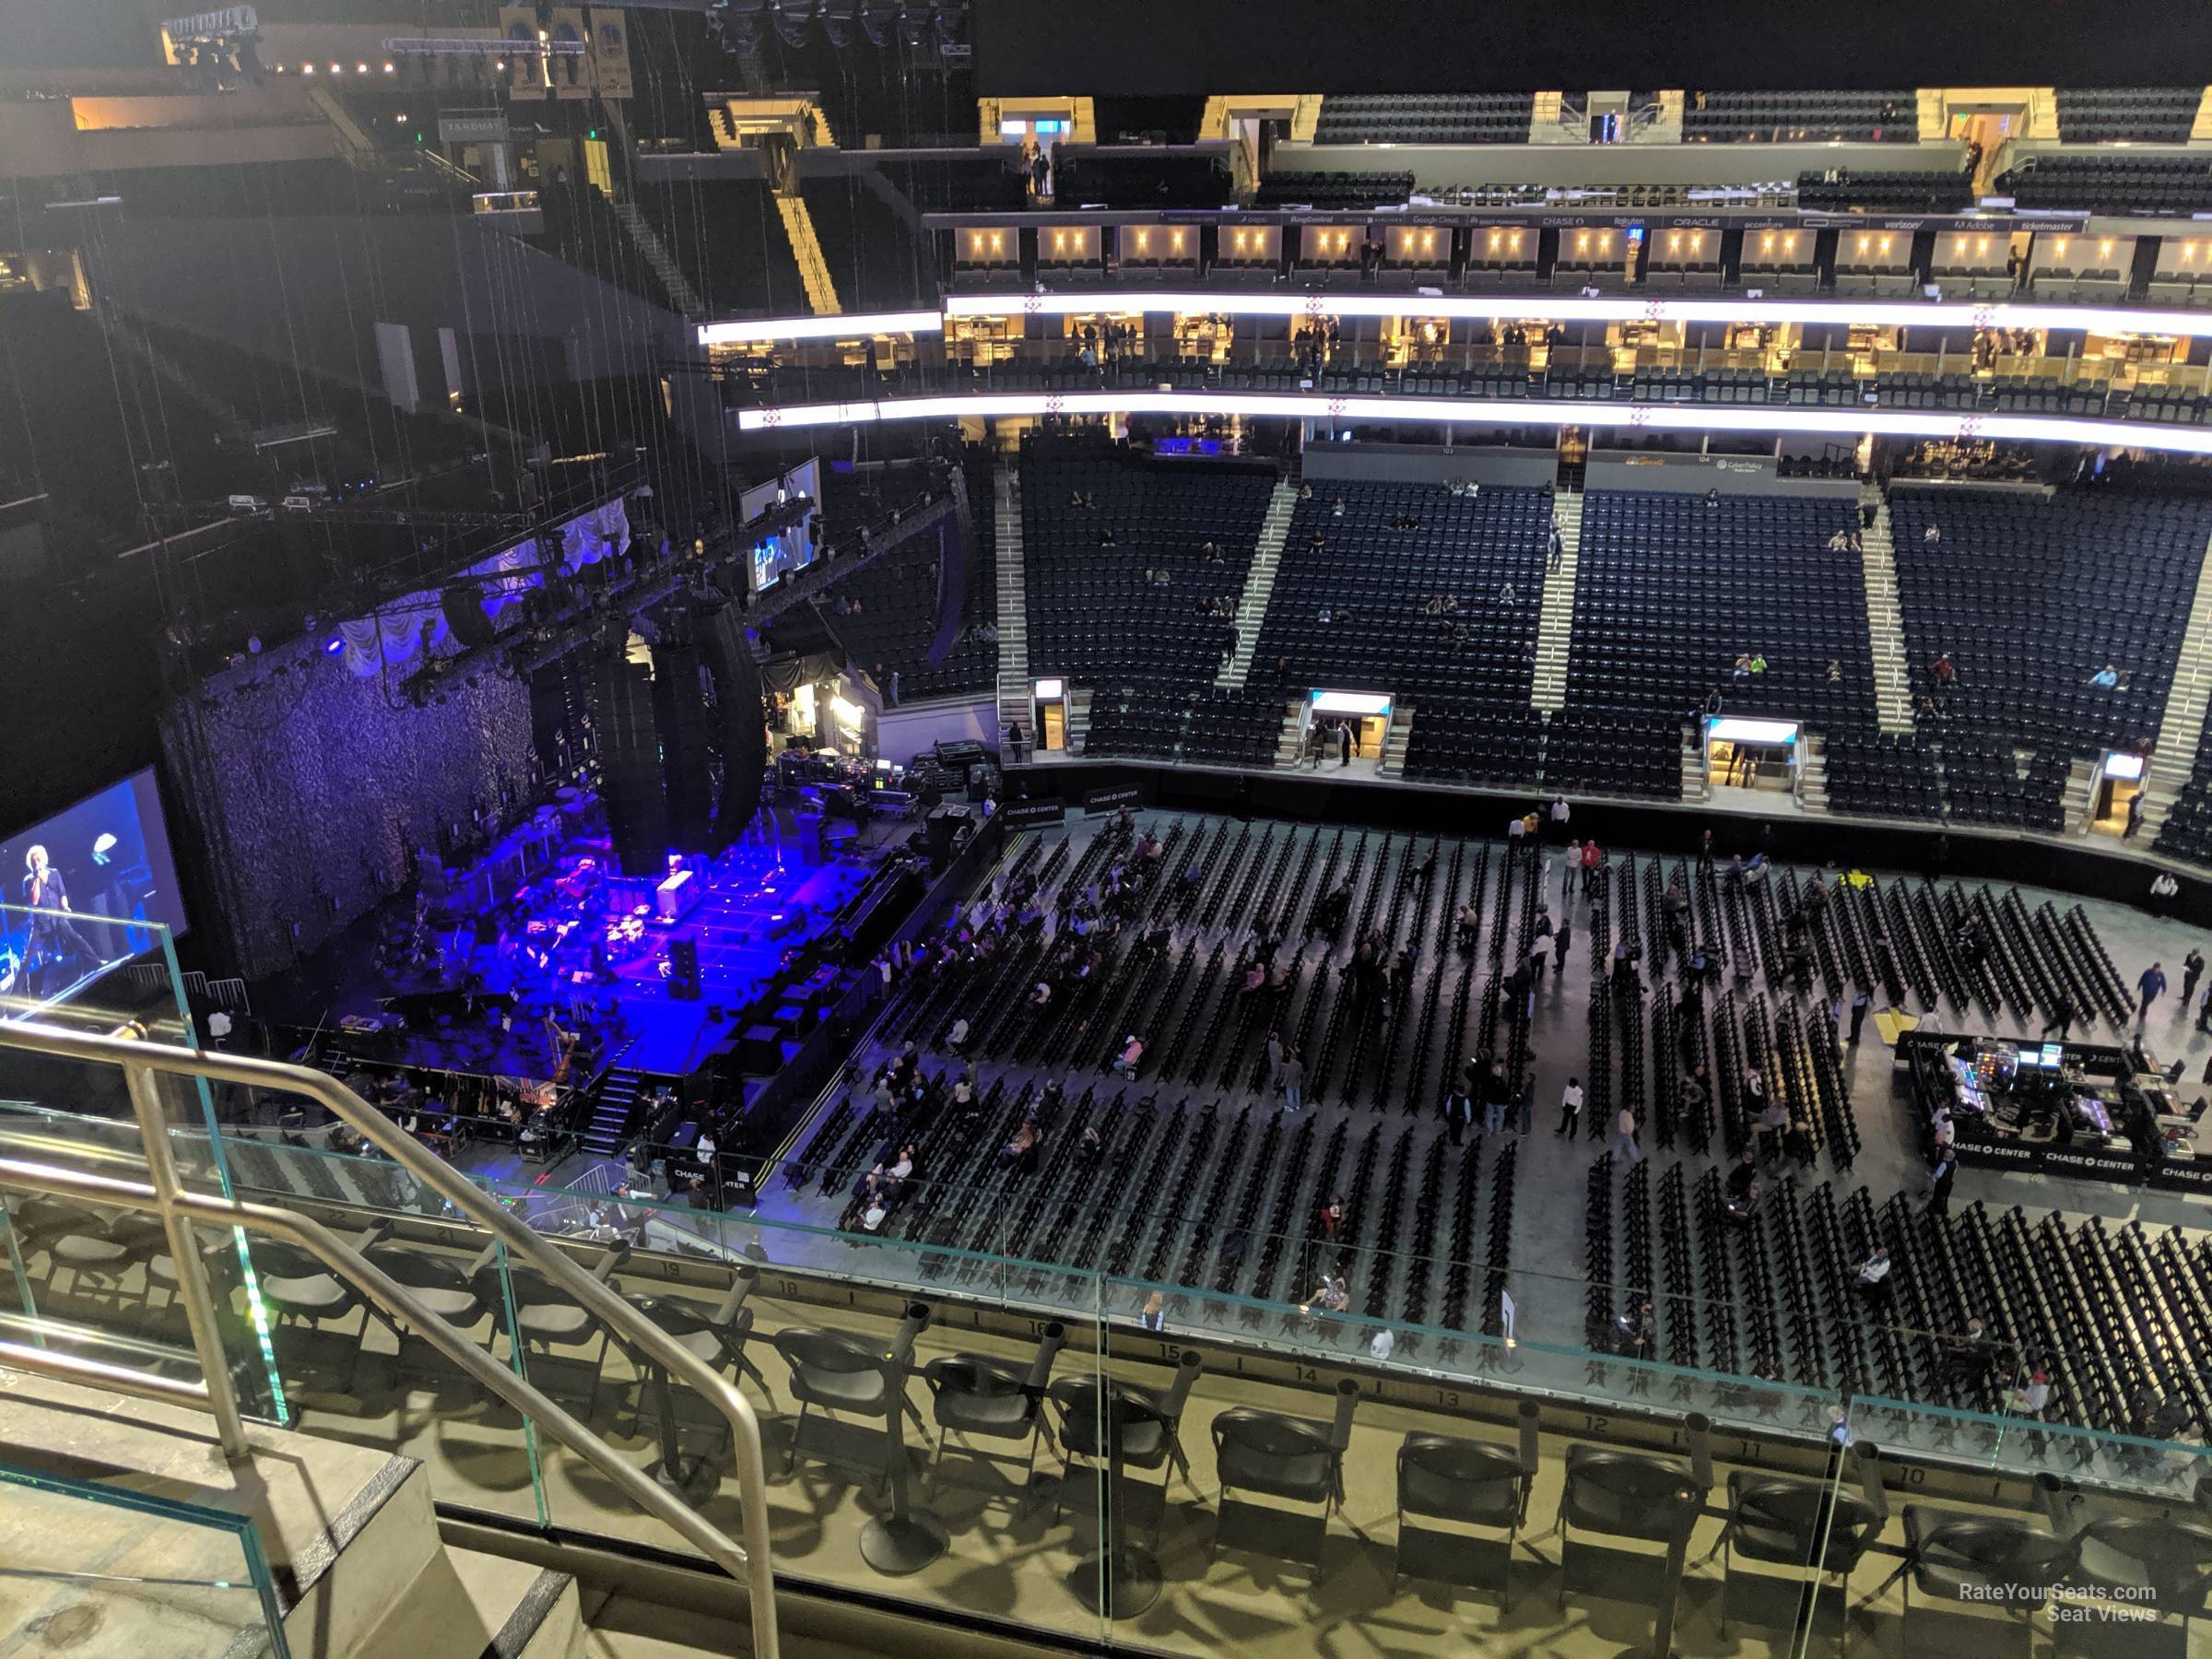 section 220, row 13 seat view  for concert - chase center